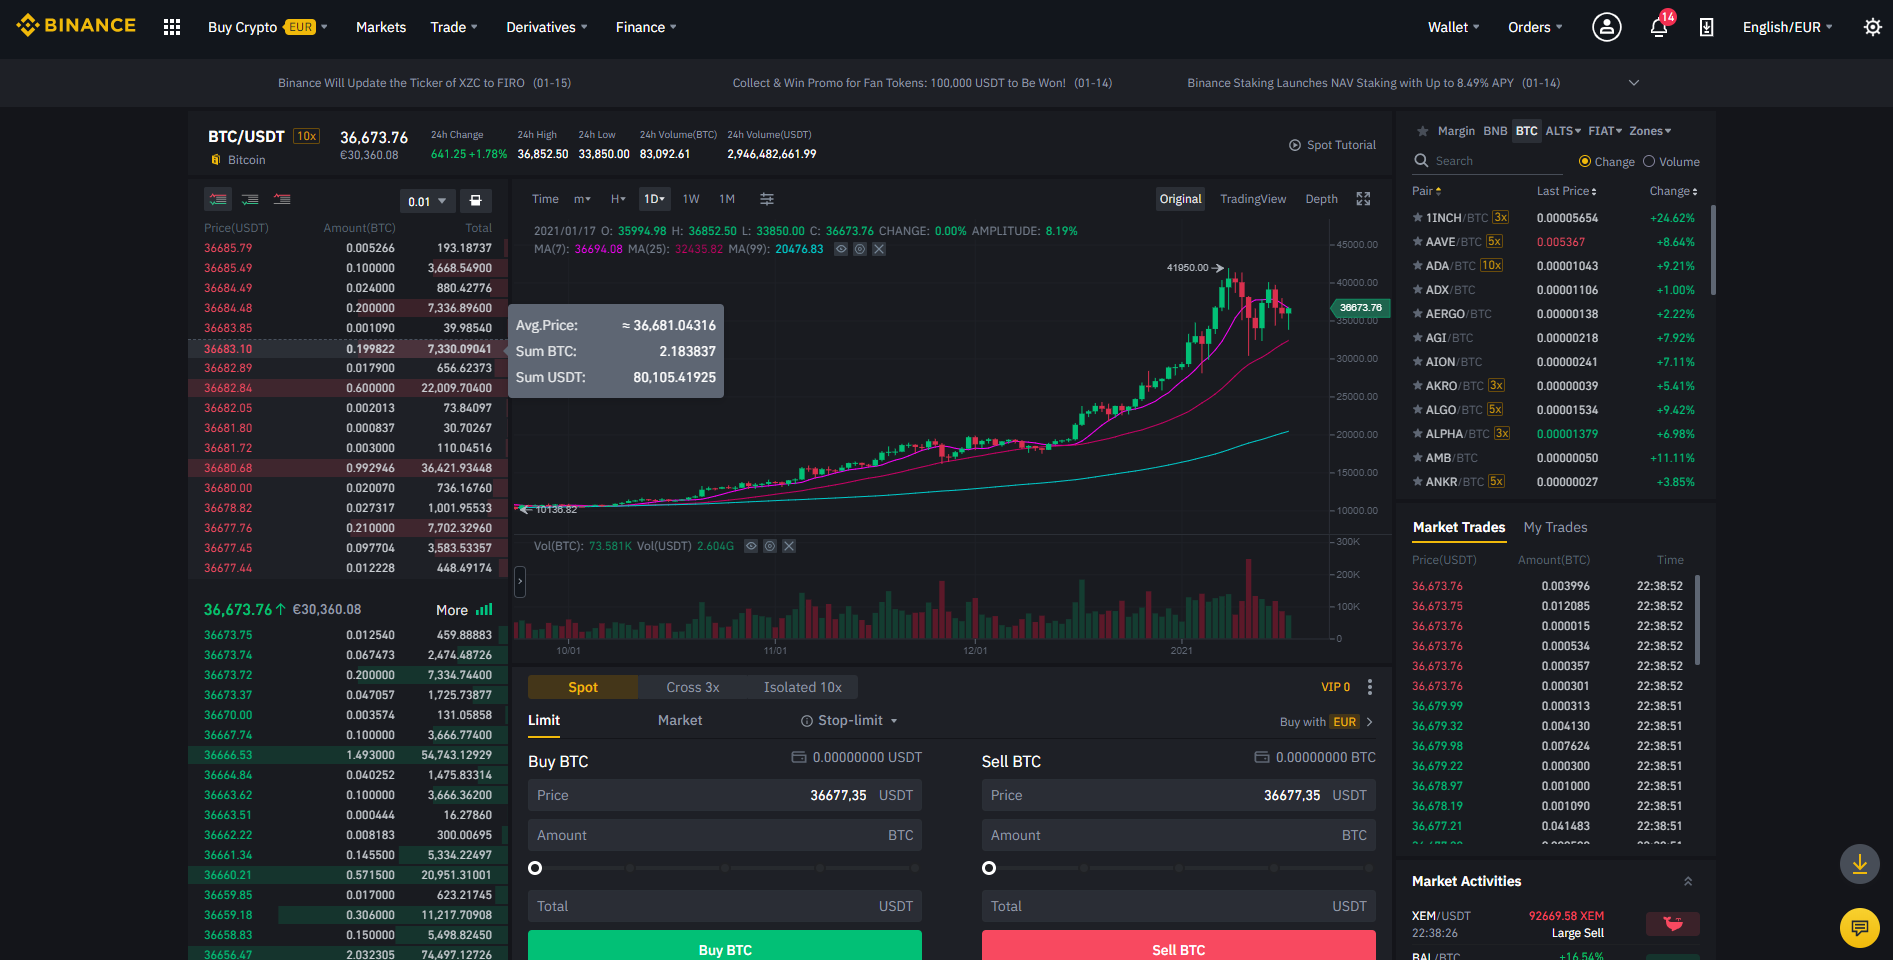 The Binance Classic Platform is the most suitable for traders